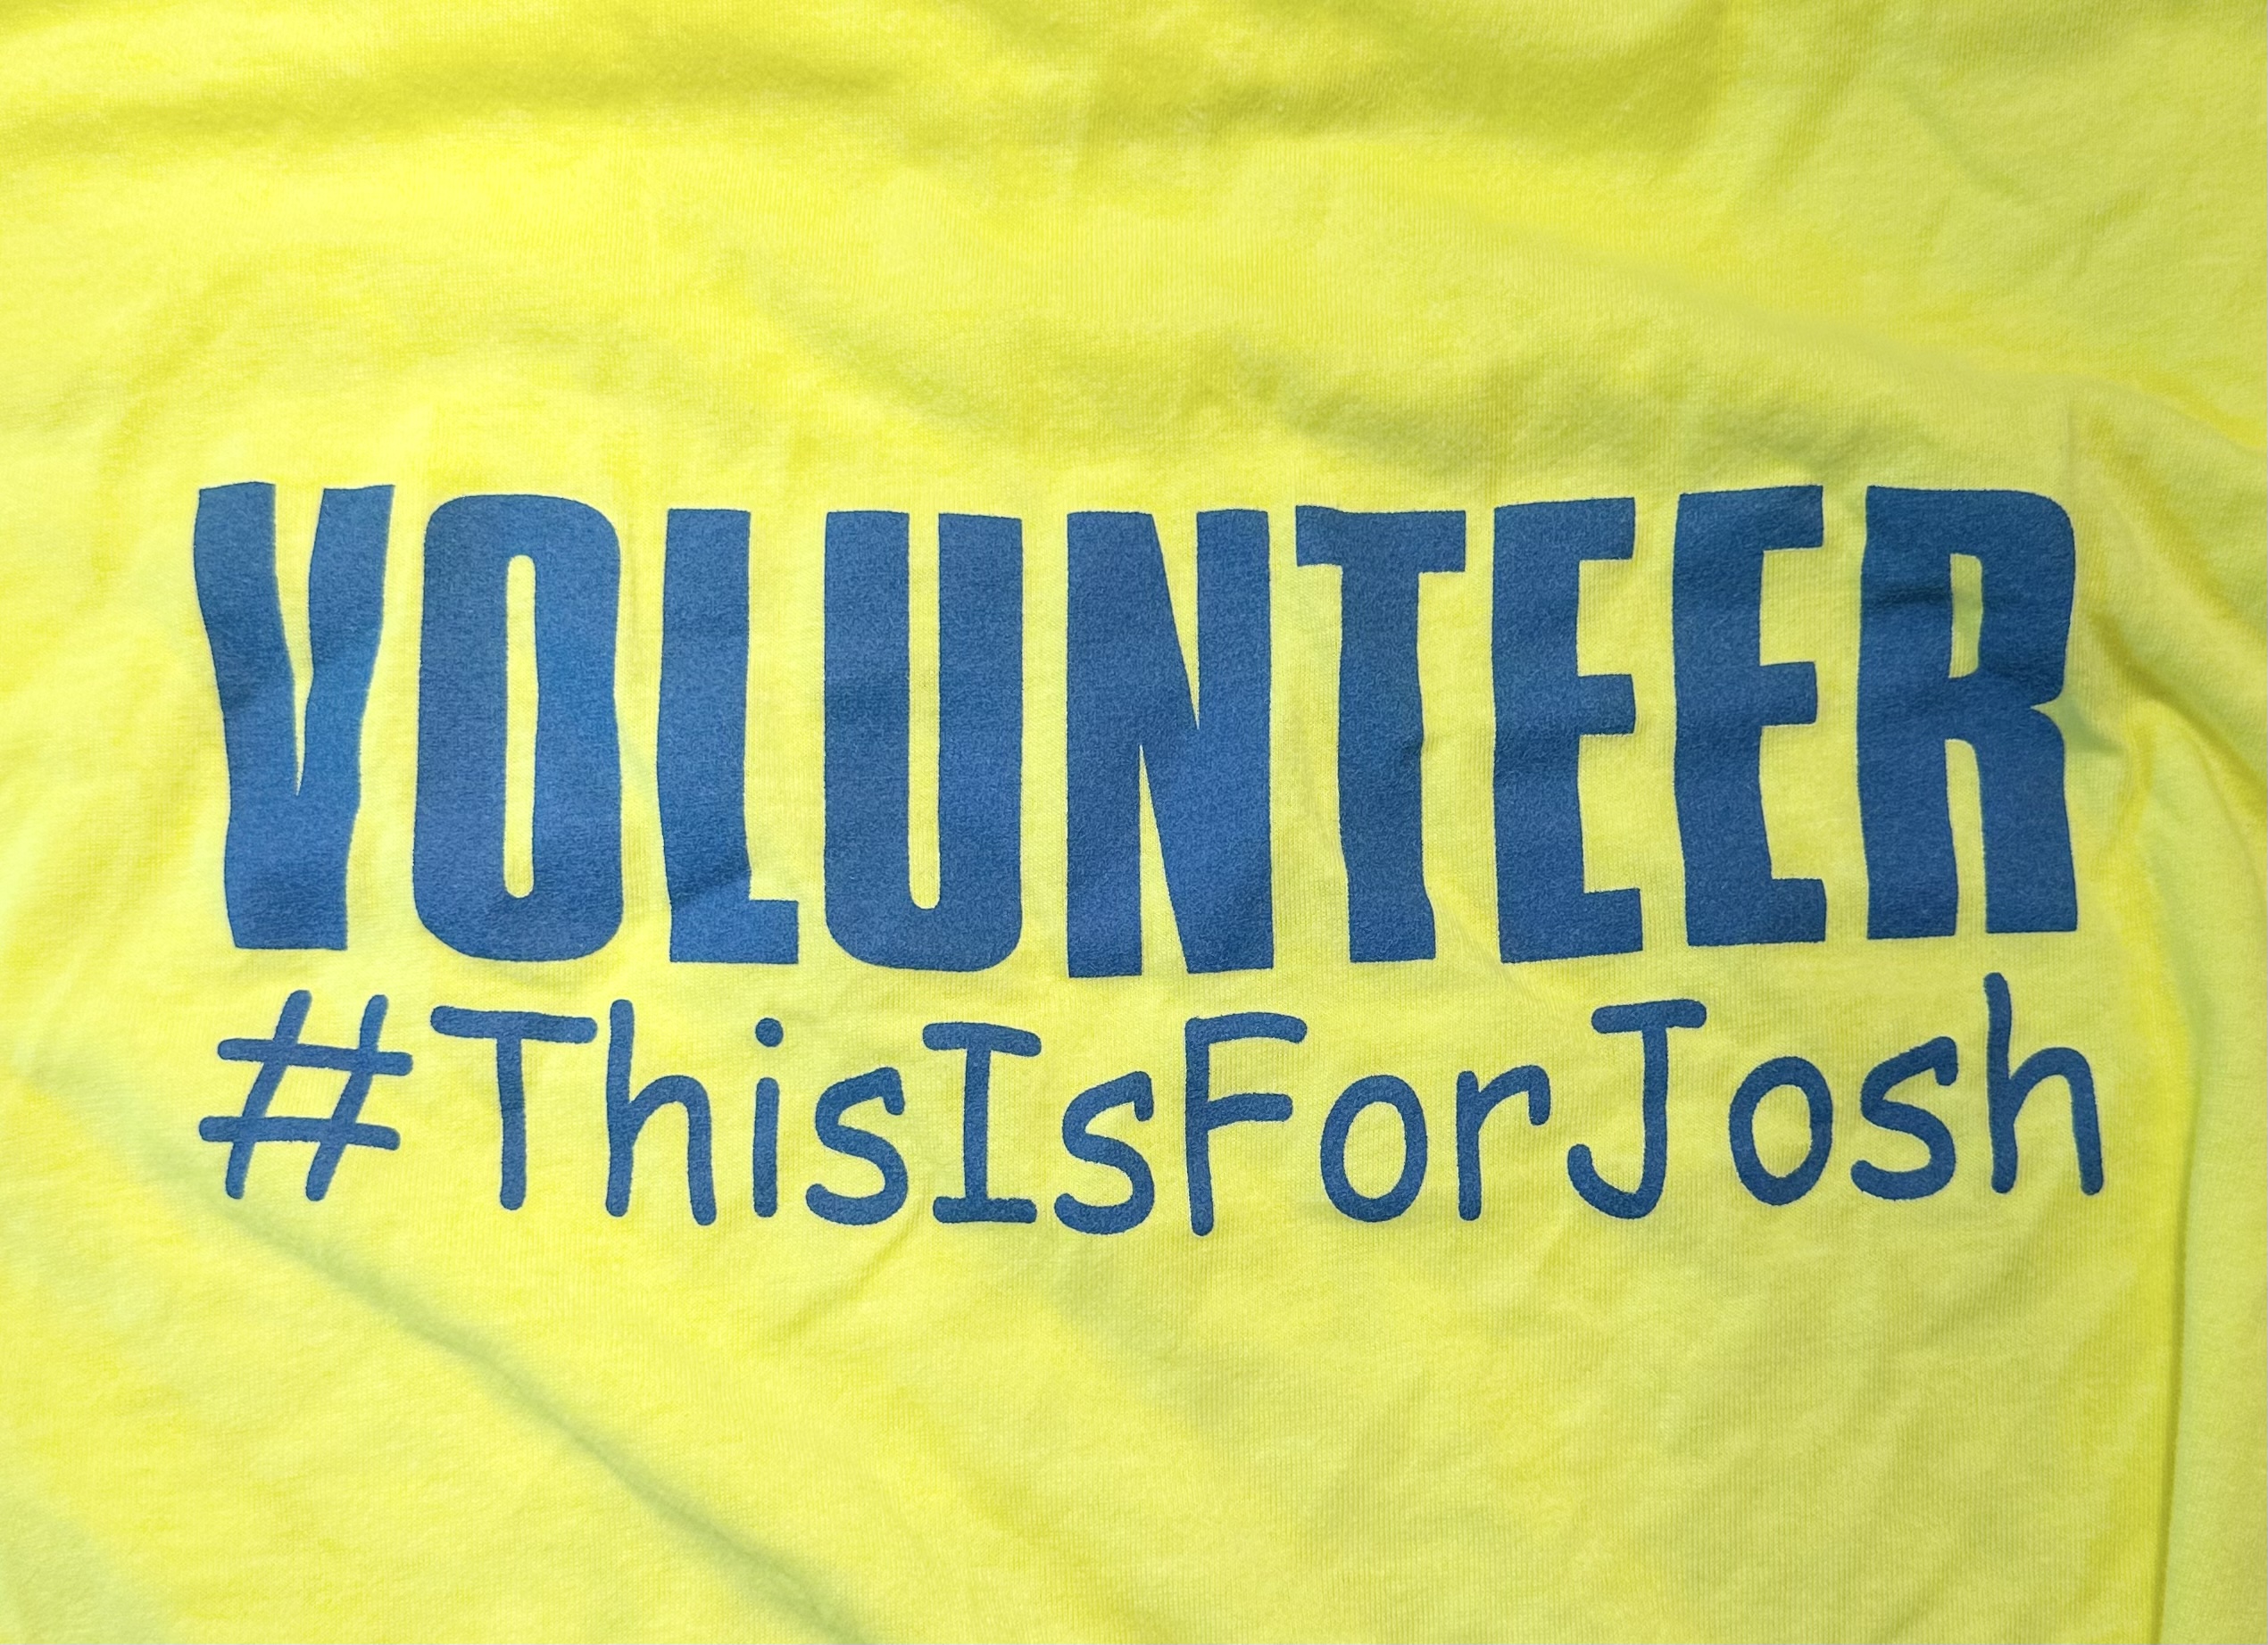 Yellow fabric background with the words "Volunteer" and "#ThisIsForJosh" in blue.